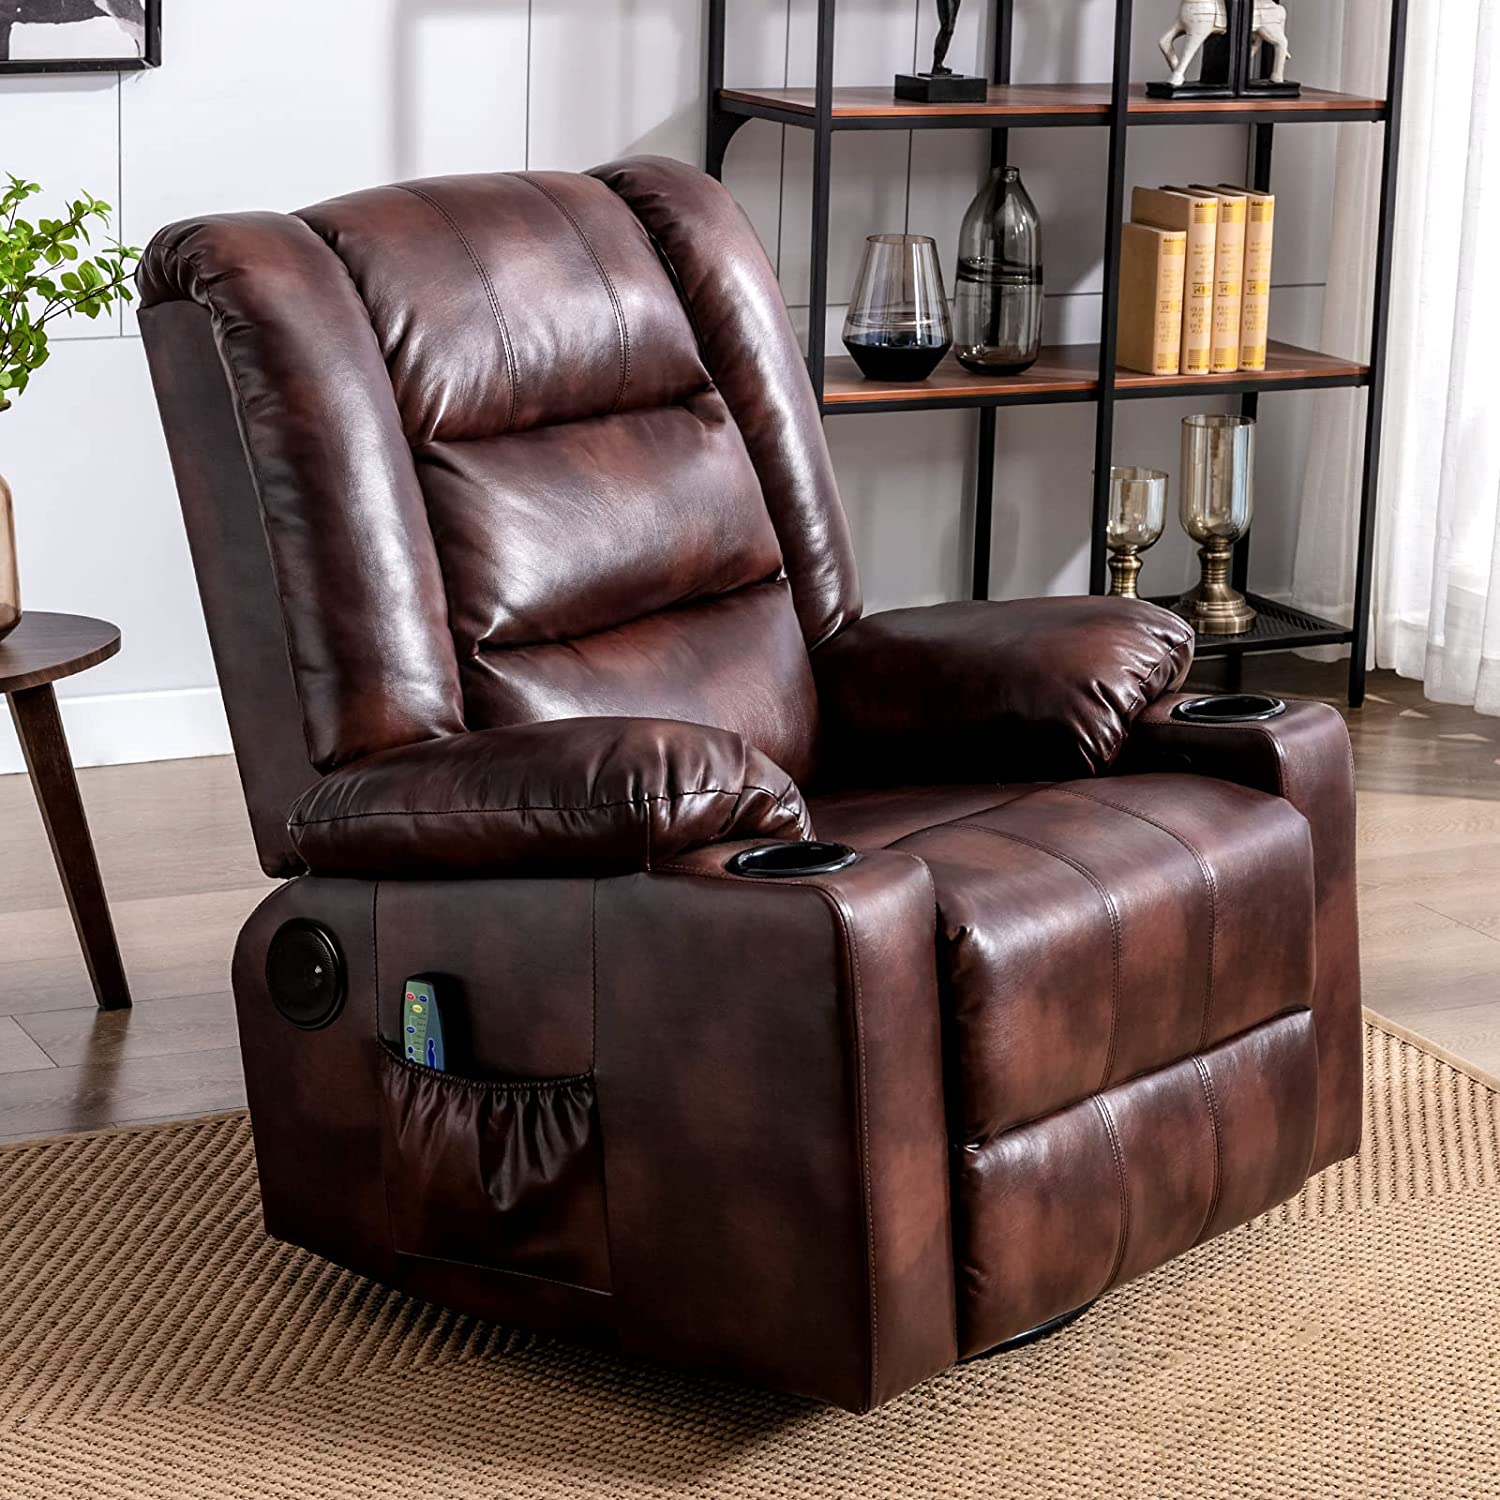 ComHoma Massage Recliner Chair